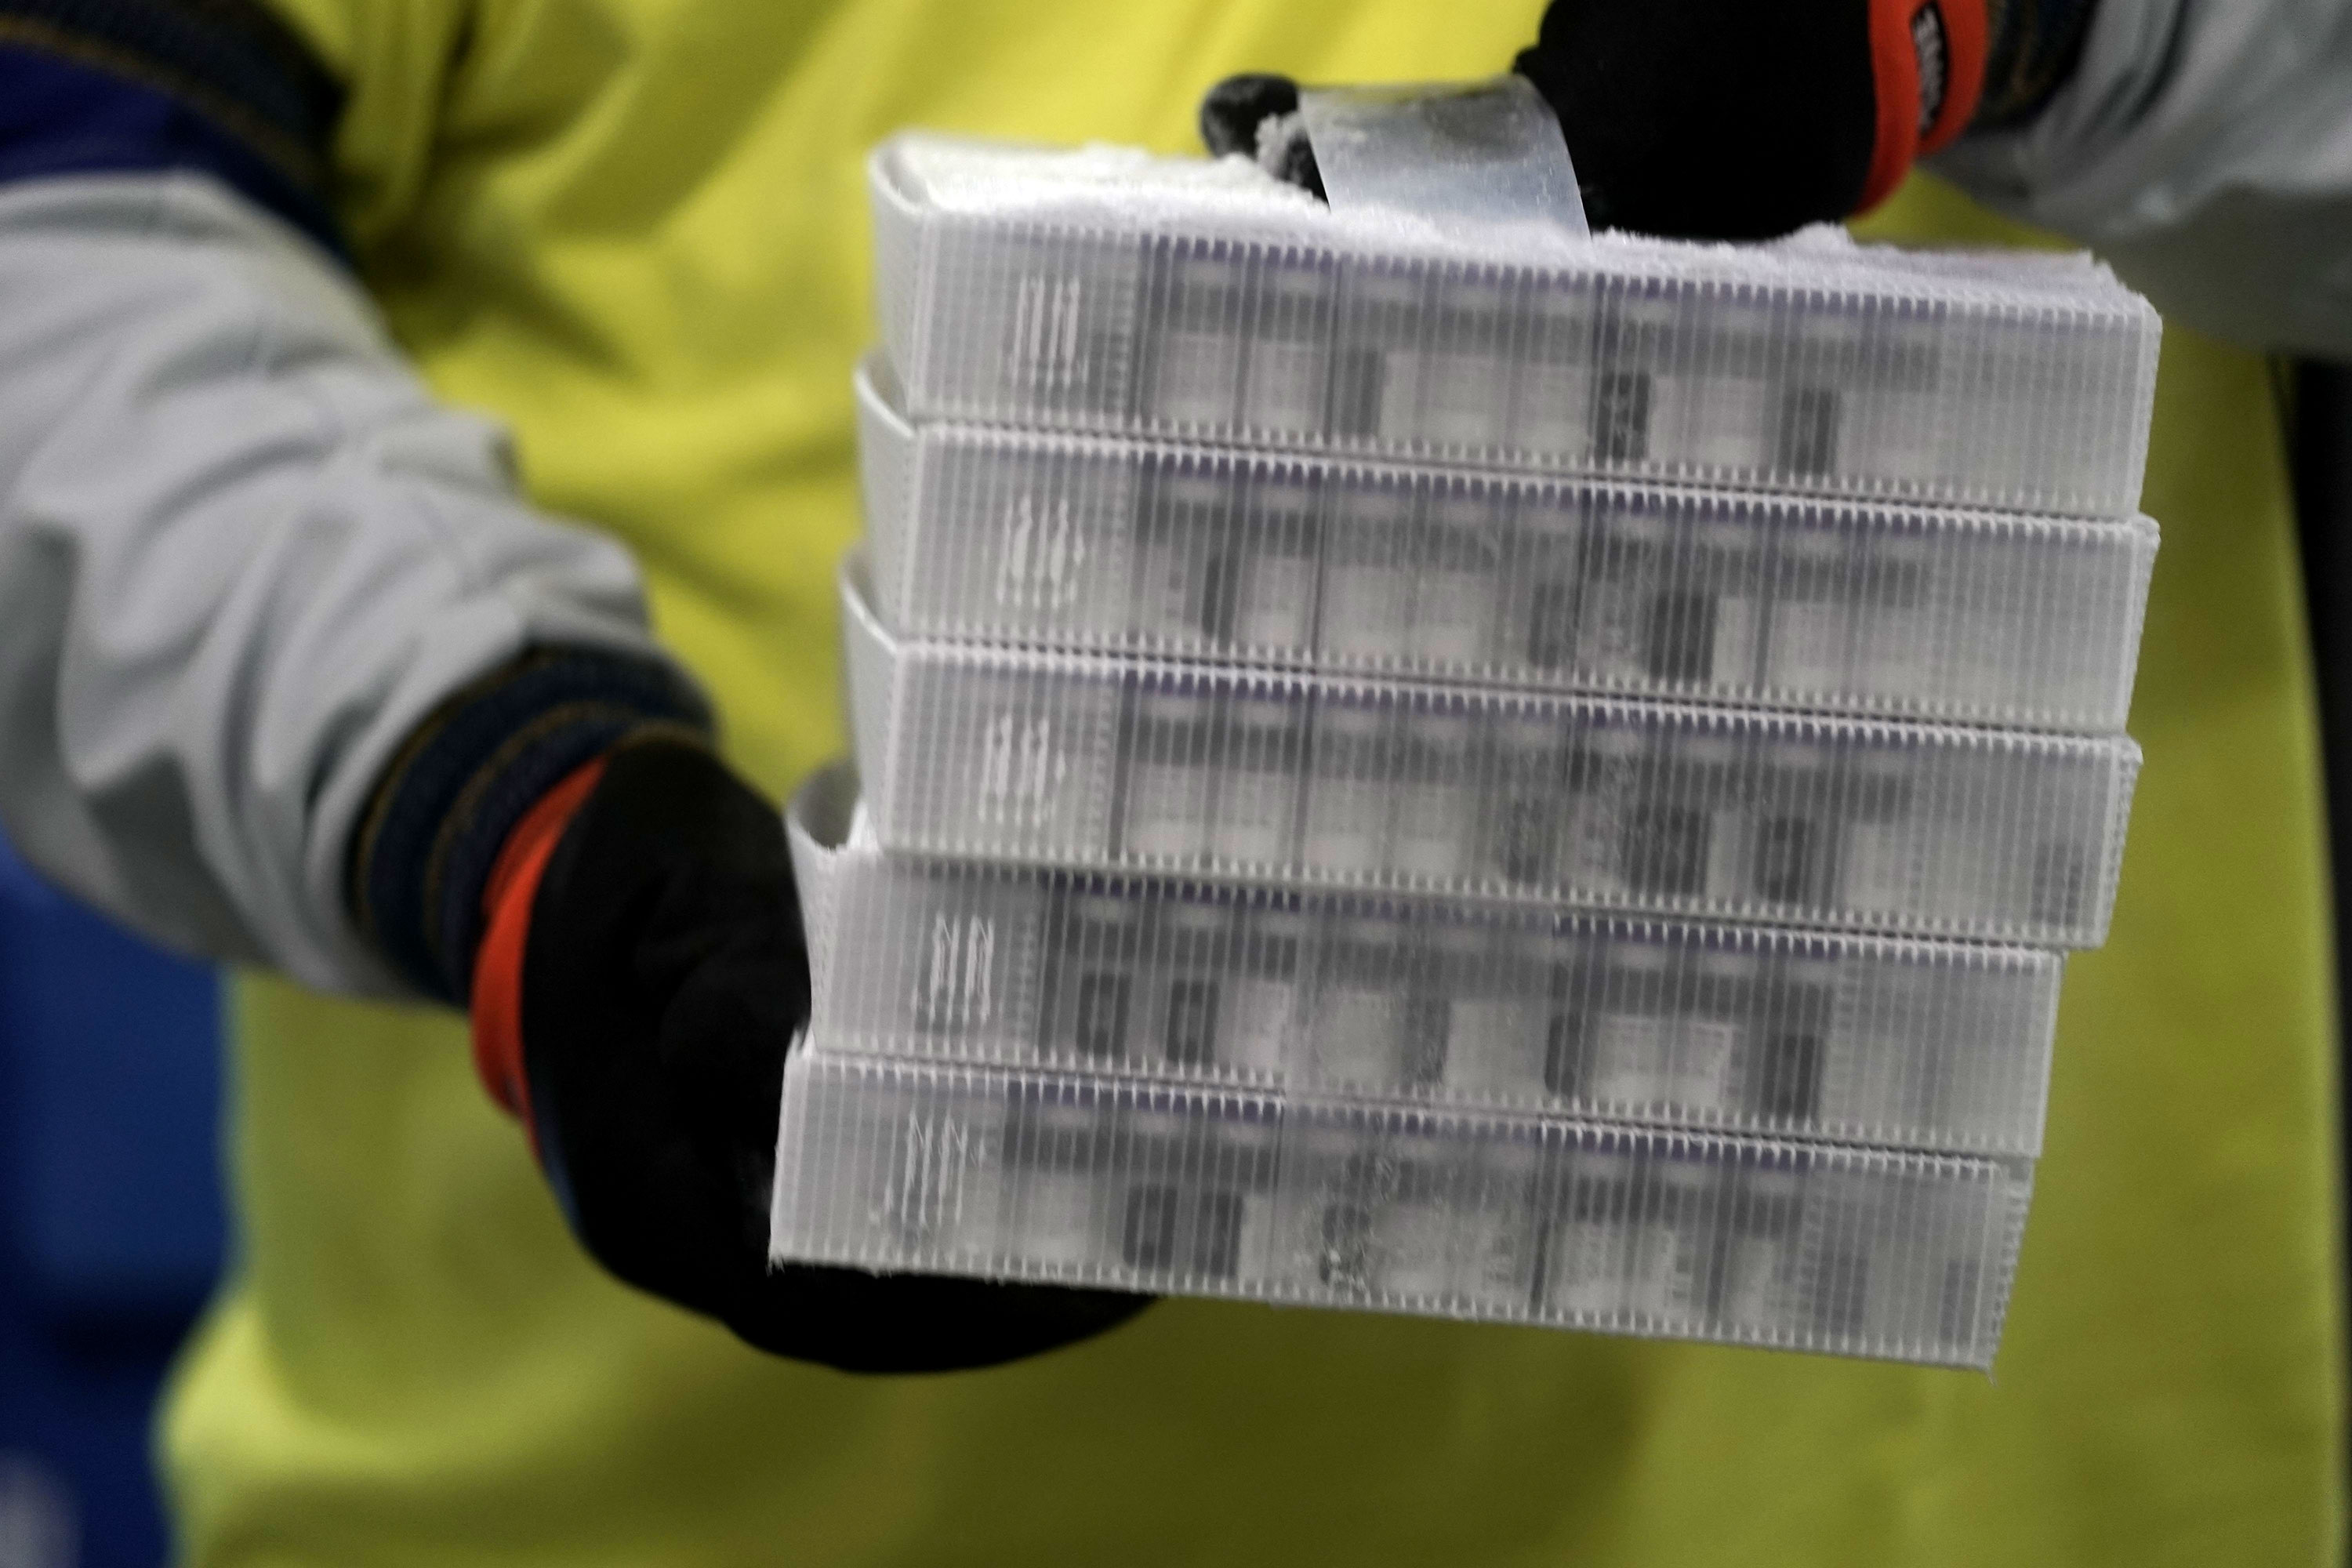 Vials of the Pfizer-BioNTech Covid-19 vaccine are prepared to be shipped at the Pfizer manufacturing plant in Kalamazoo, Michigan on December 13.